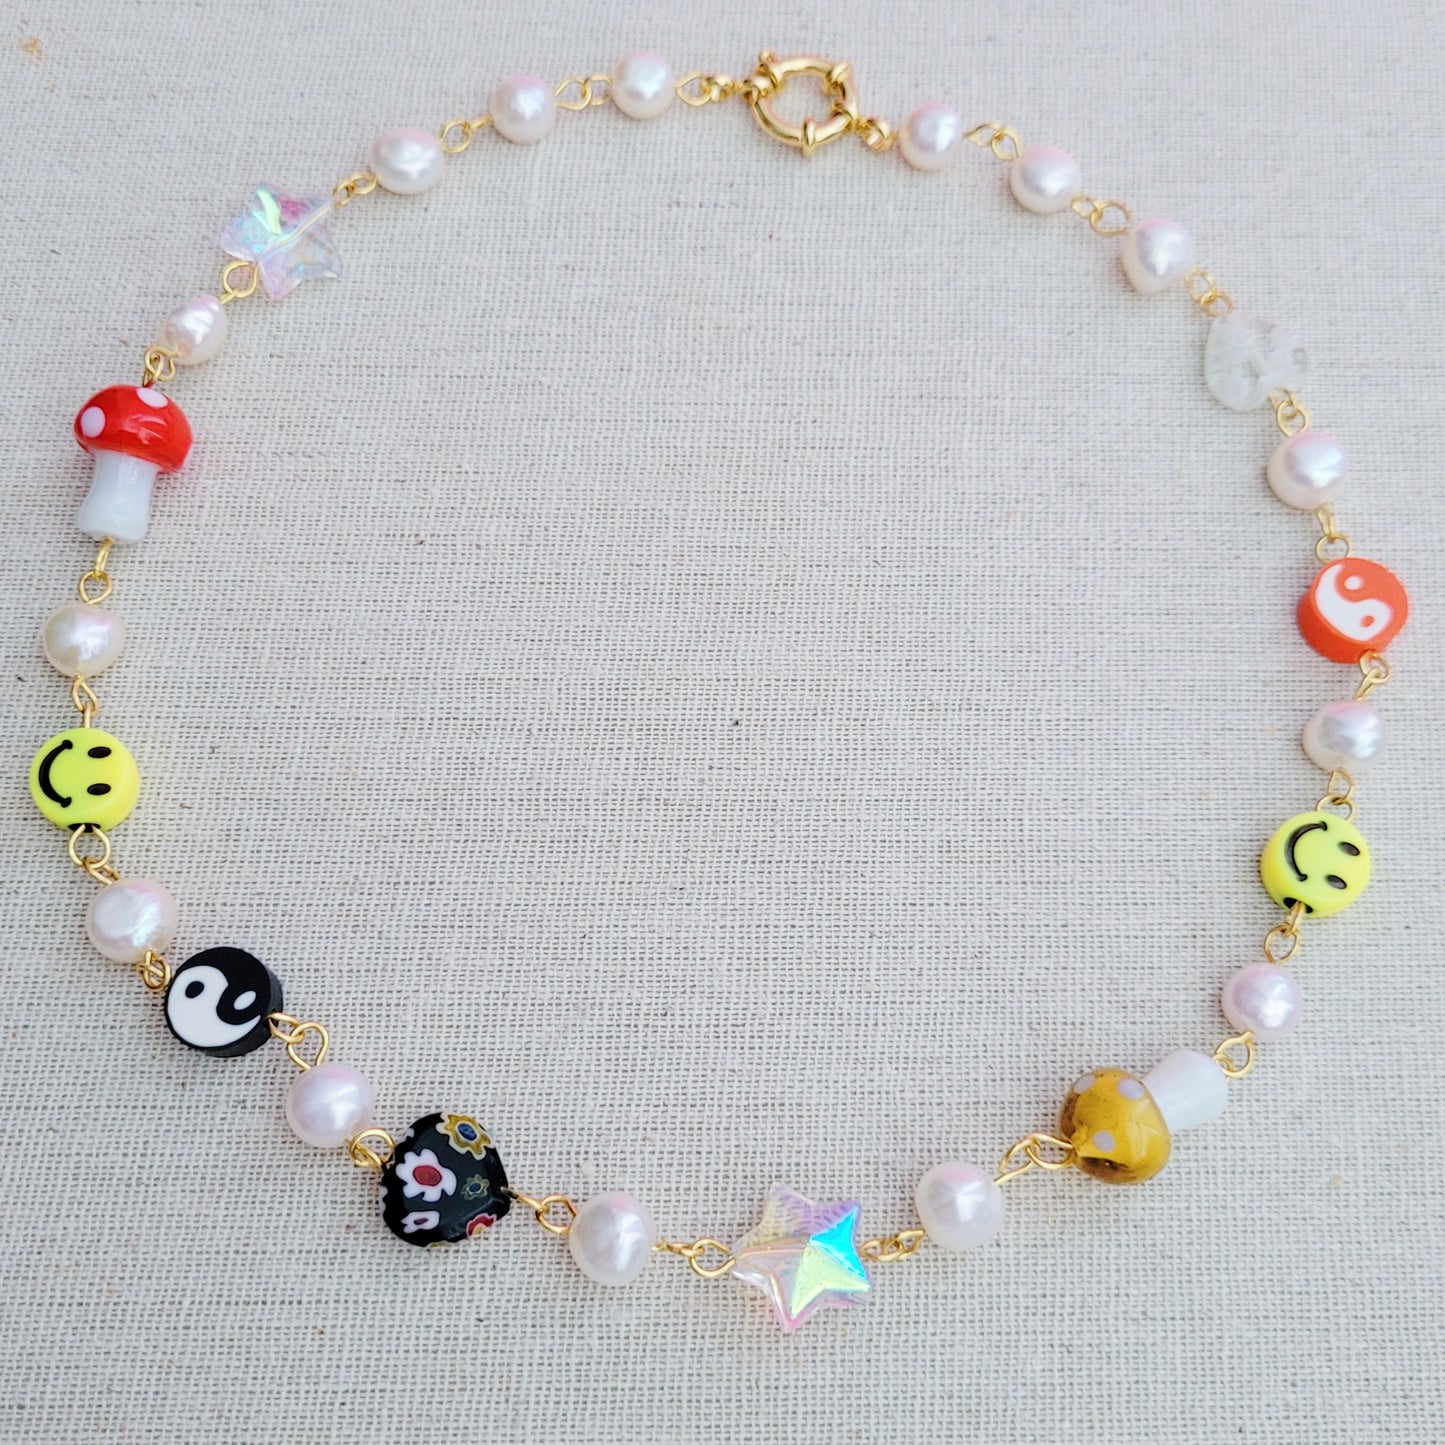 90s Love necklace